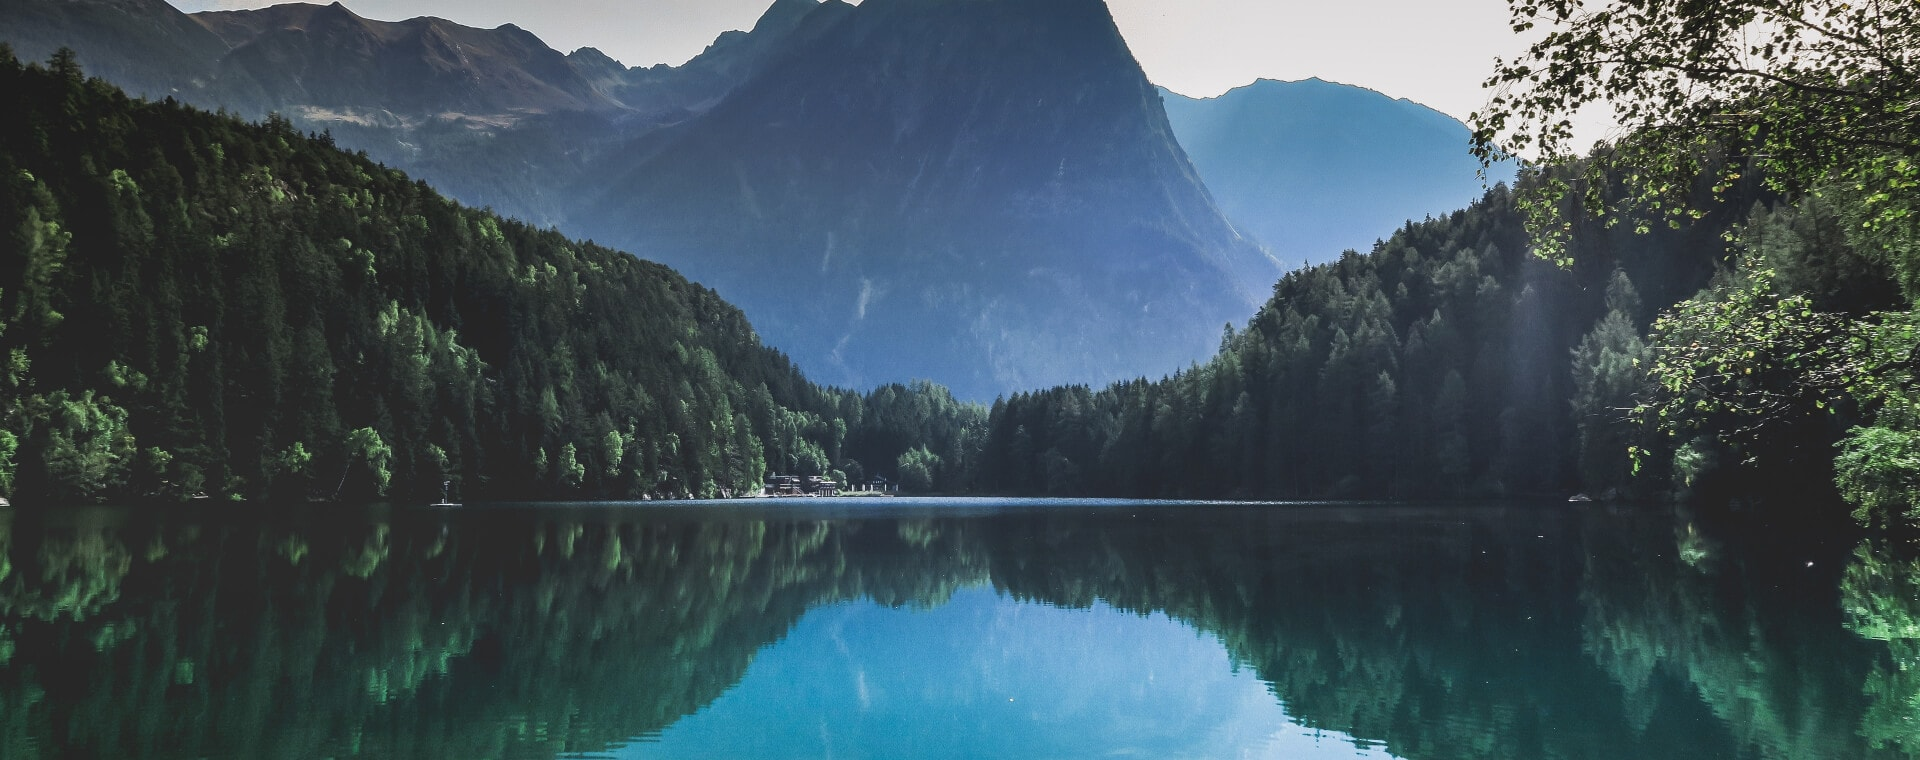 A lake surrounded by mountains and trees.